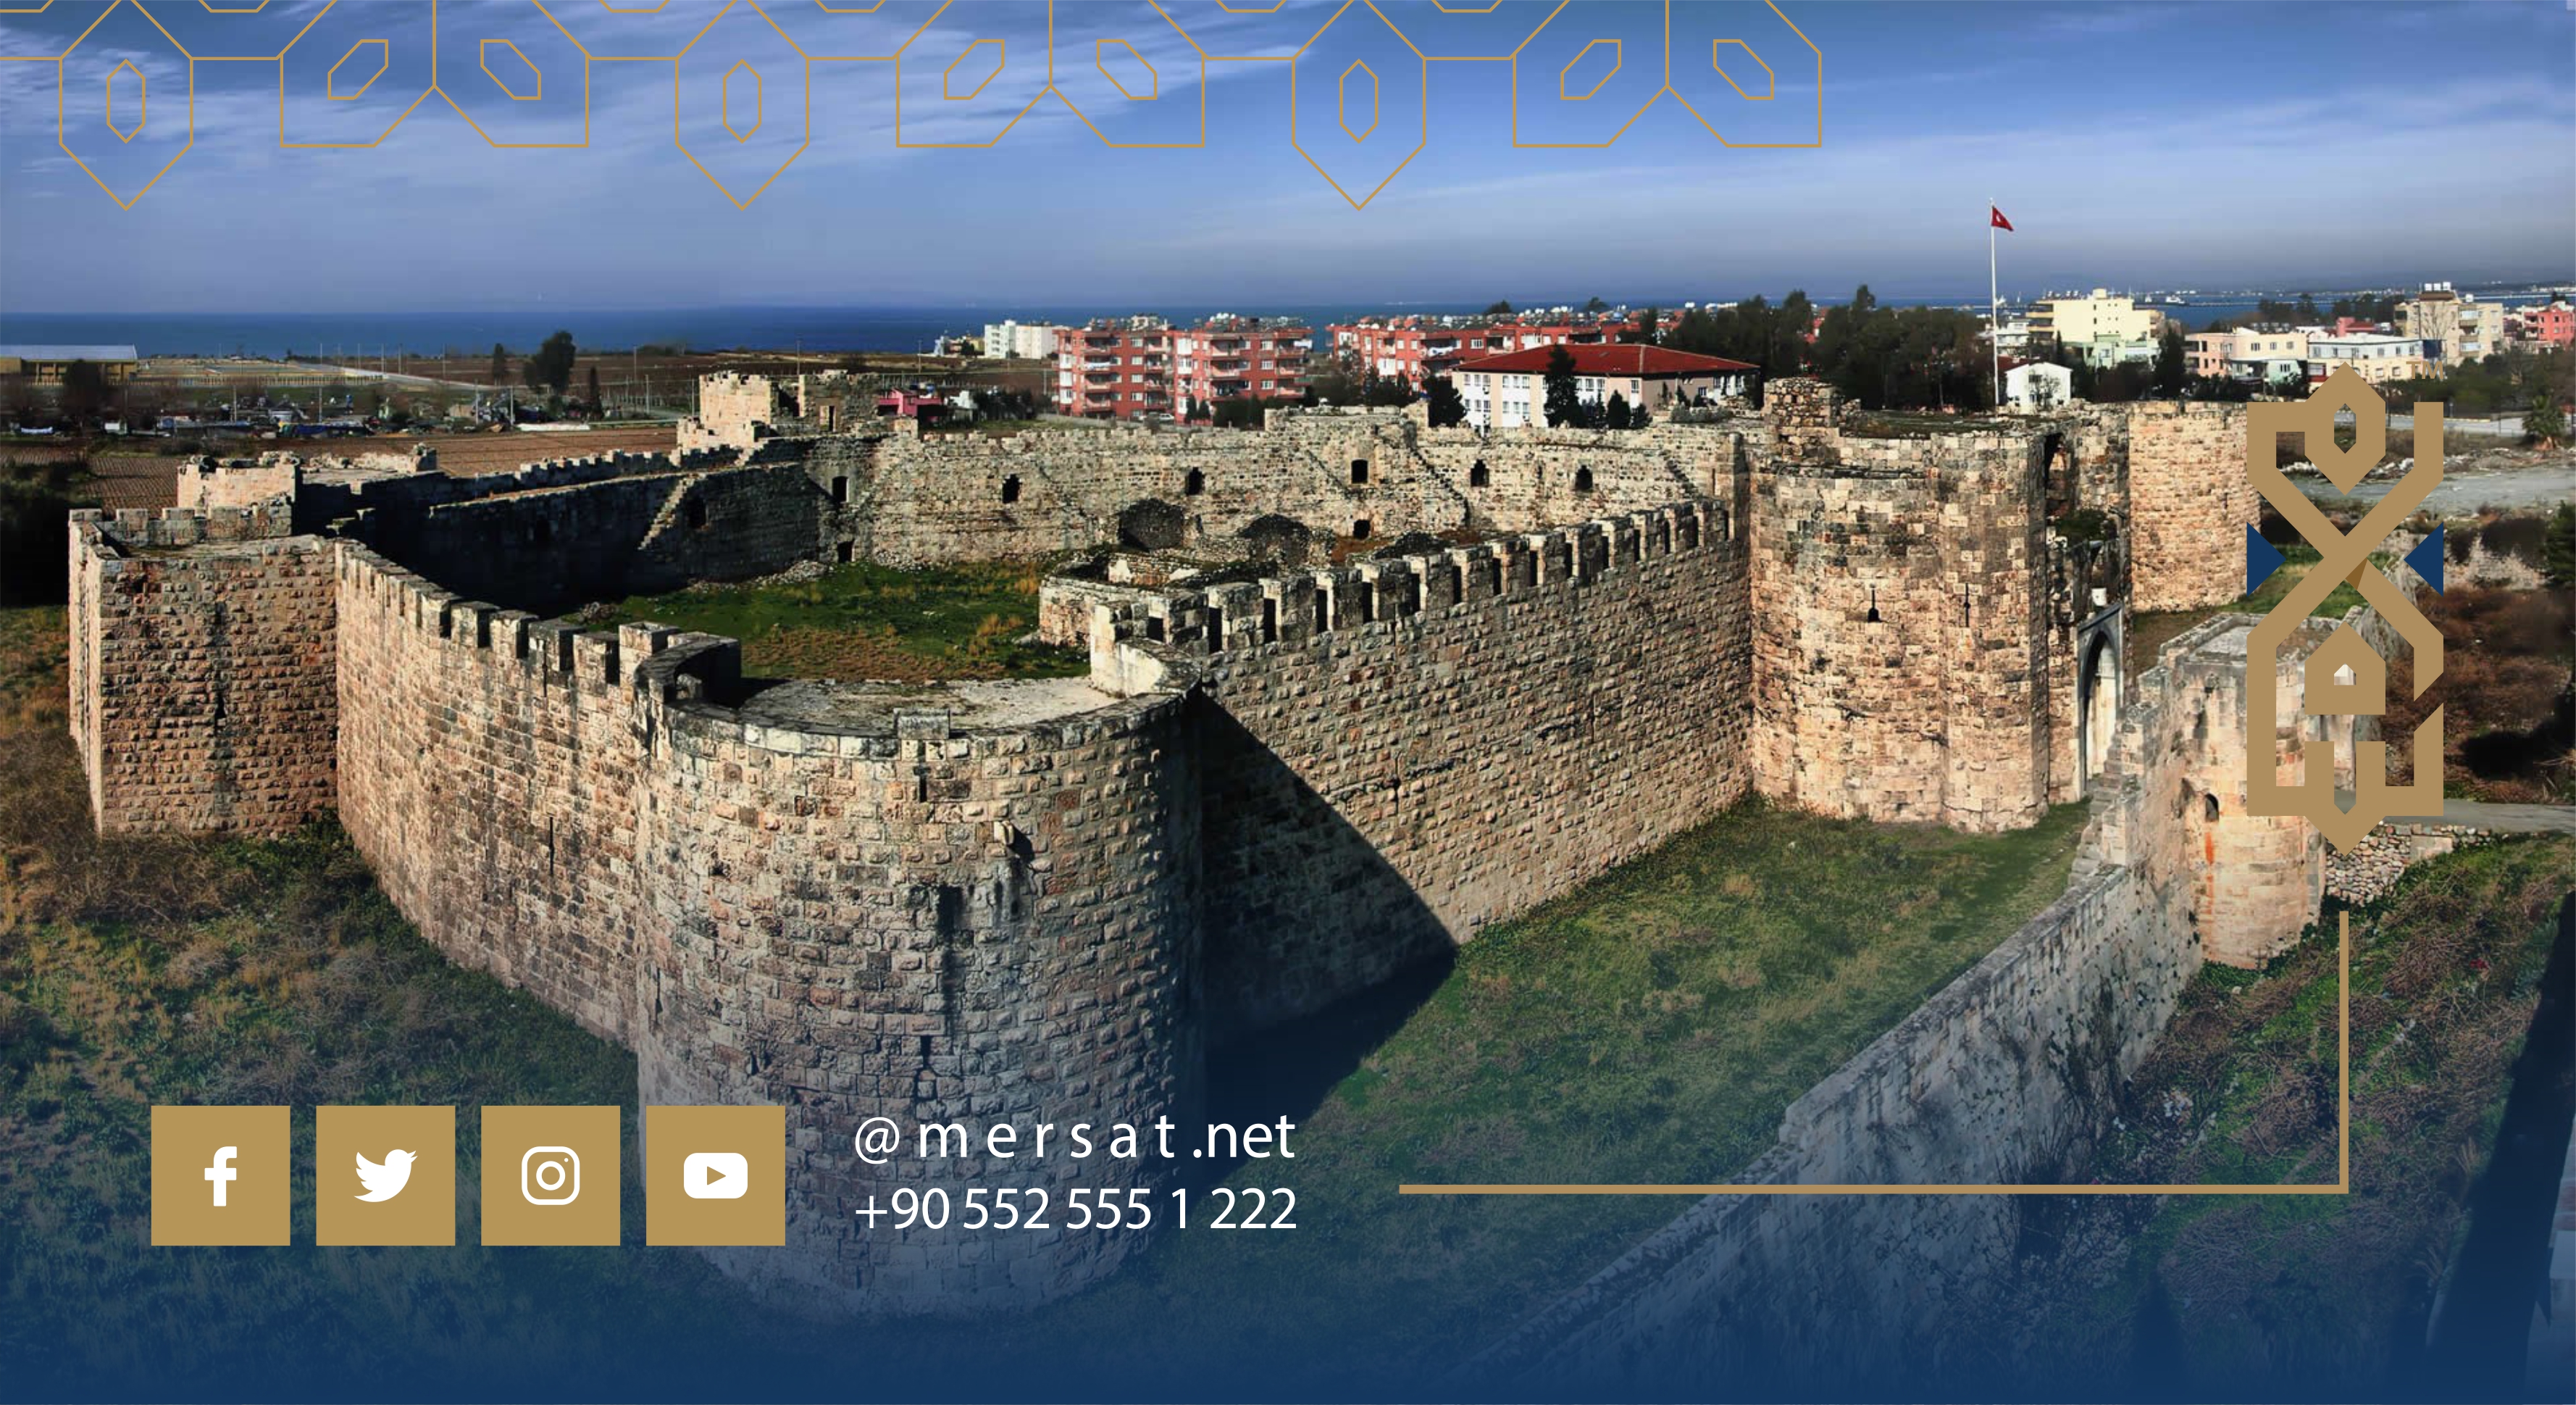 Hatay is one of the most important ancient cities in the world